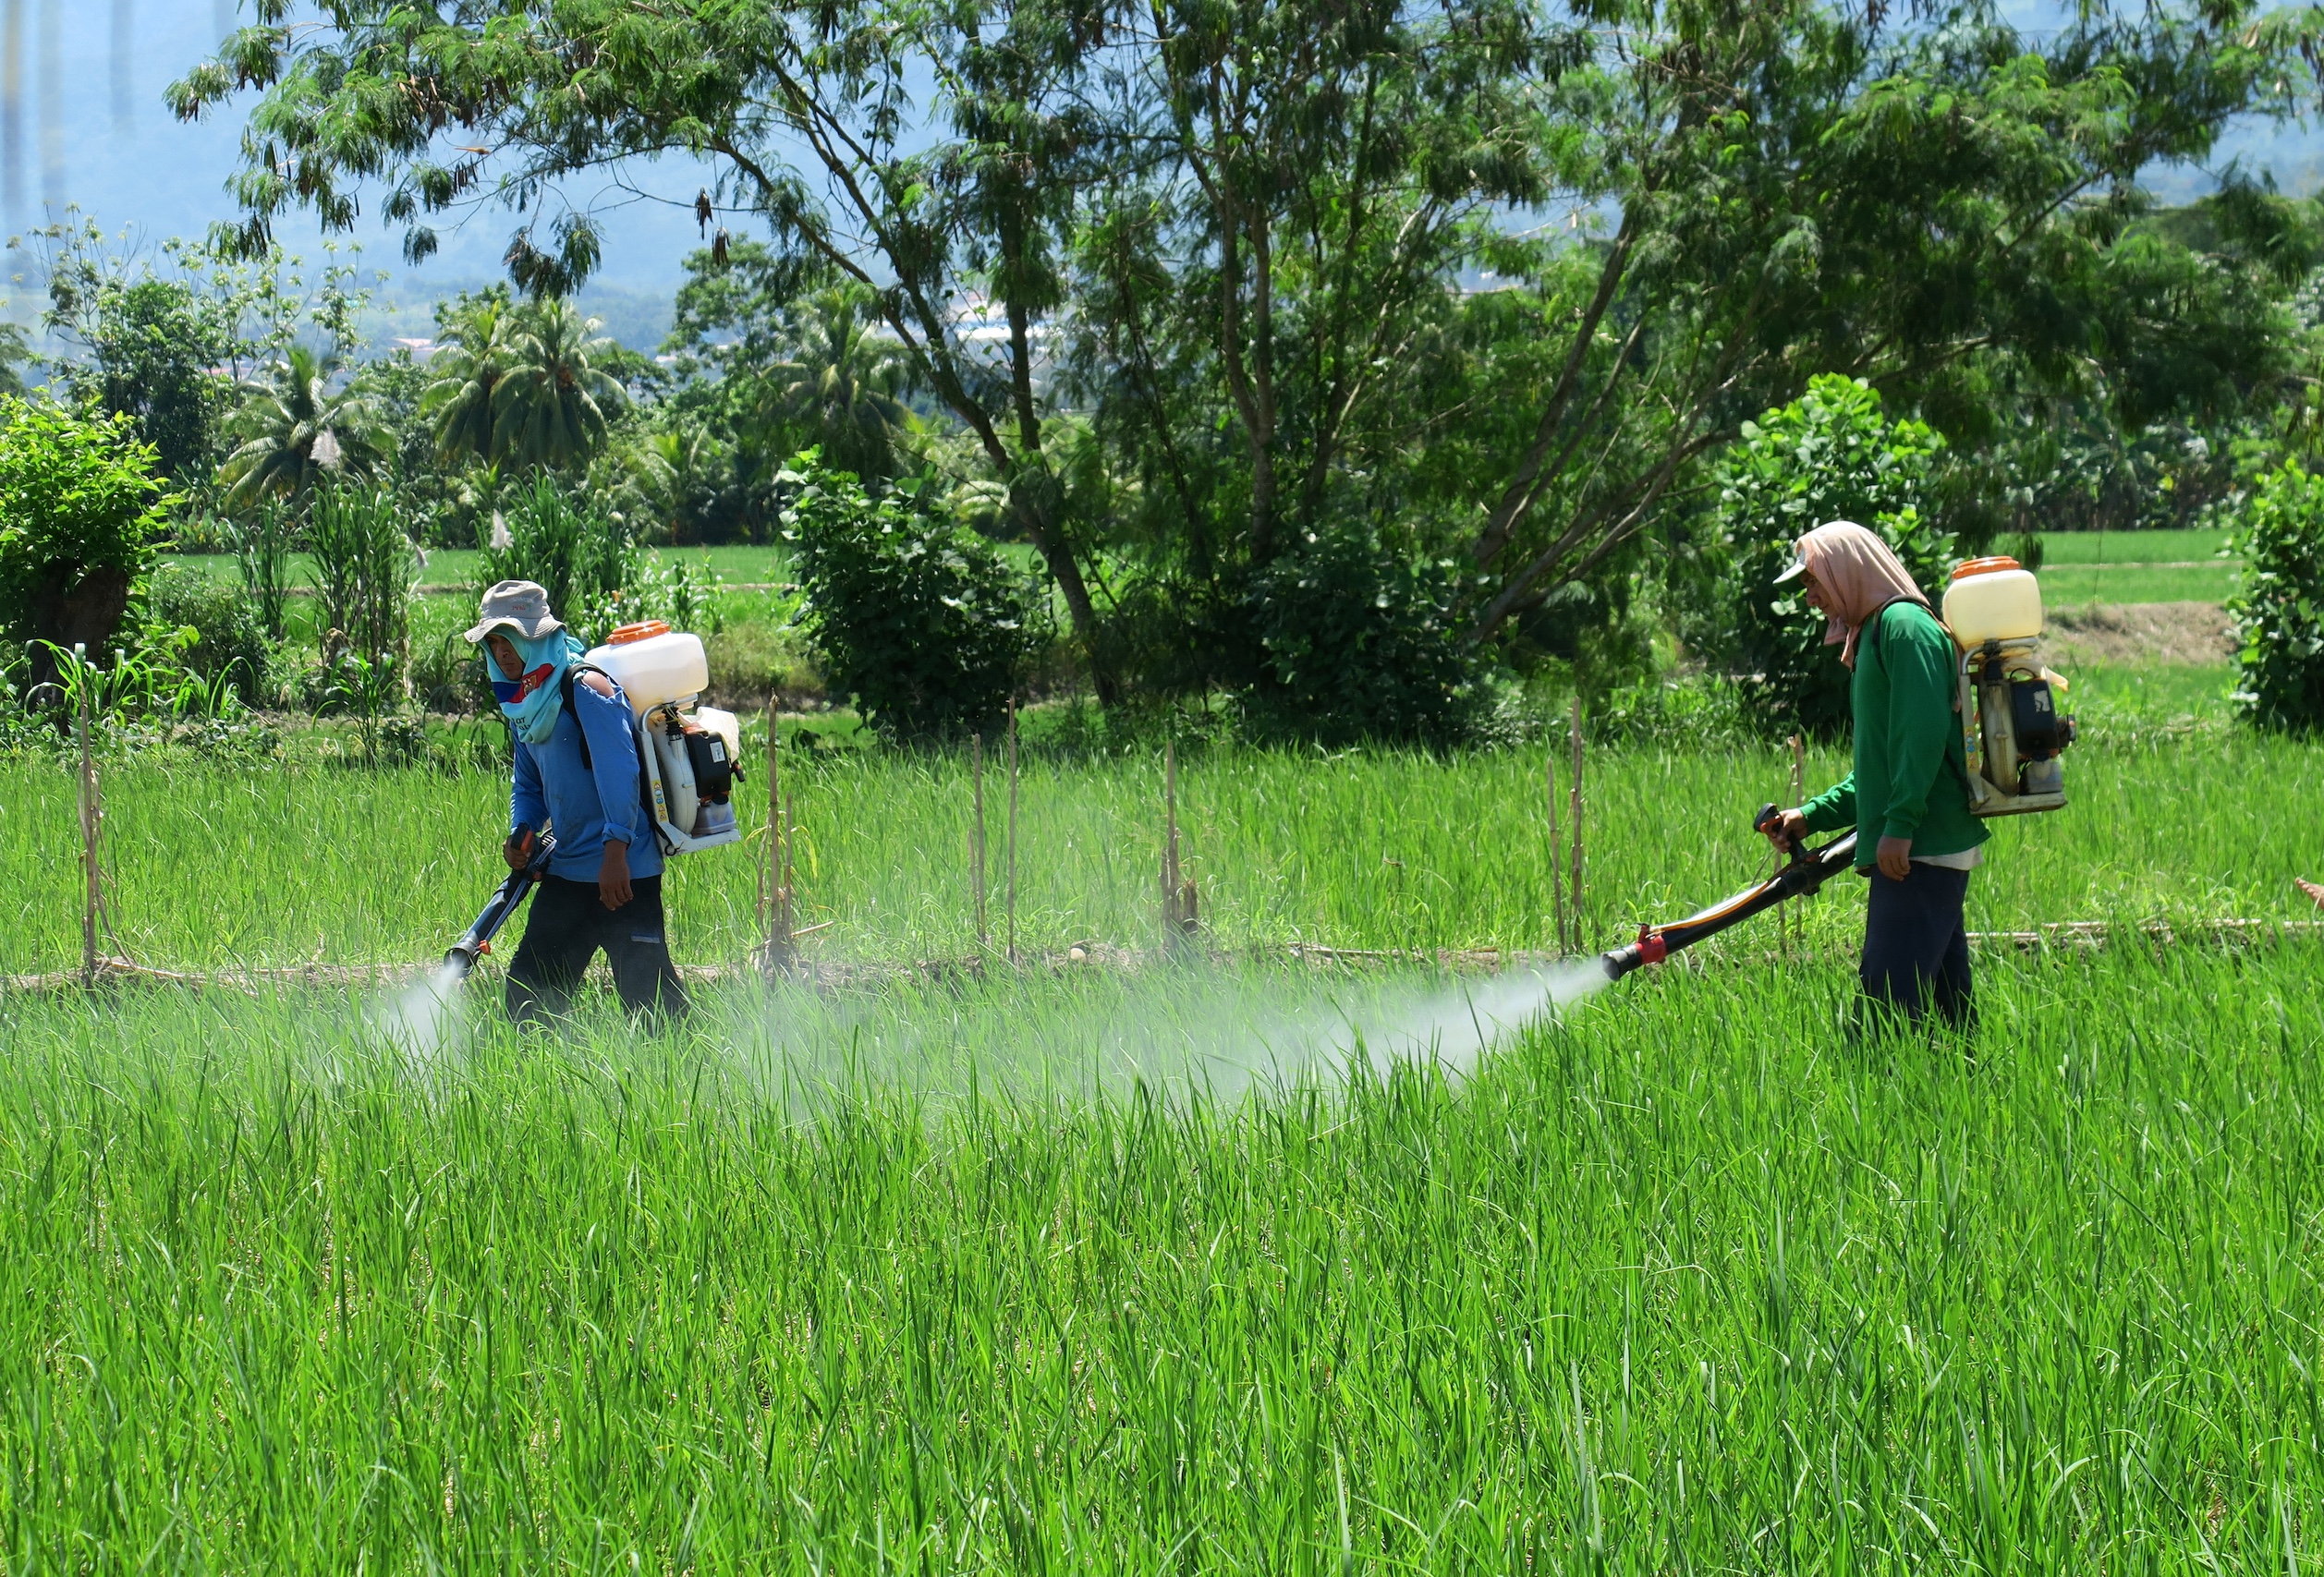 <p>Workers spray pesticides on rice plantations near the Peruvian city of Tarapoto, in the Amazonian region of San Martín. Peru&#8217;s lax regulations allow the use of pesticides banned in many other countries. (Image: <a href="https://www.flickr.com/photos/dpu-ucl/34926558253/in/photolist-3brkWN-fhrCWG-MZEKw-VdkJWR-P14dSx-NExkLW-Tkbah">Laura-Fee Wloka</a> / <a href="https://www.flickr.com/people/dpu-ucl/">Unidad de Planificación del Desarrollo, University College London</a>, <a href="https://creativecommons.org/licenses/by/2.0/">CC BY</a>)</p>